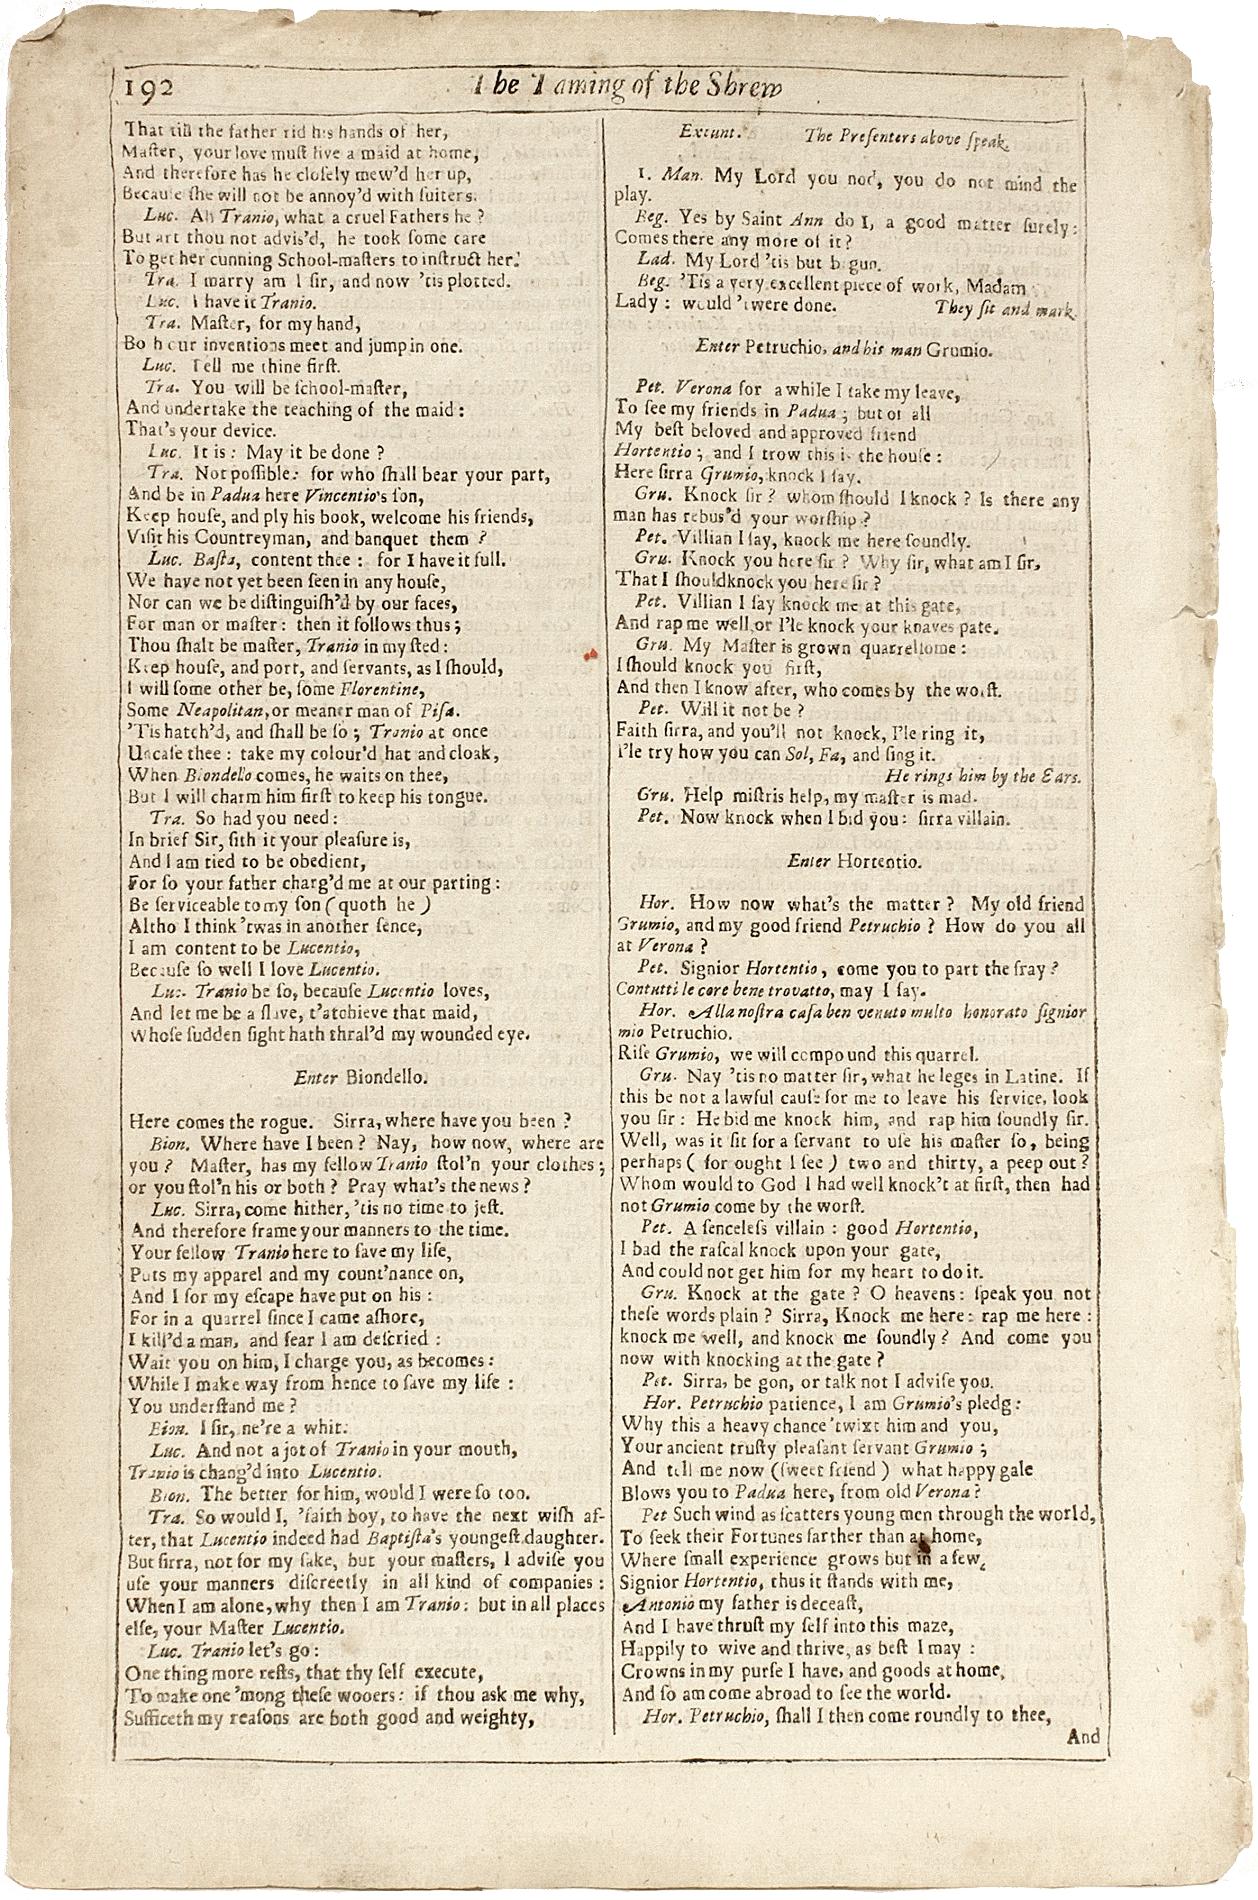 Late 17th Century Shakespeare. The Taming of the Shrew - FOURTH FOLIO - 1685 - page 187/192